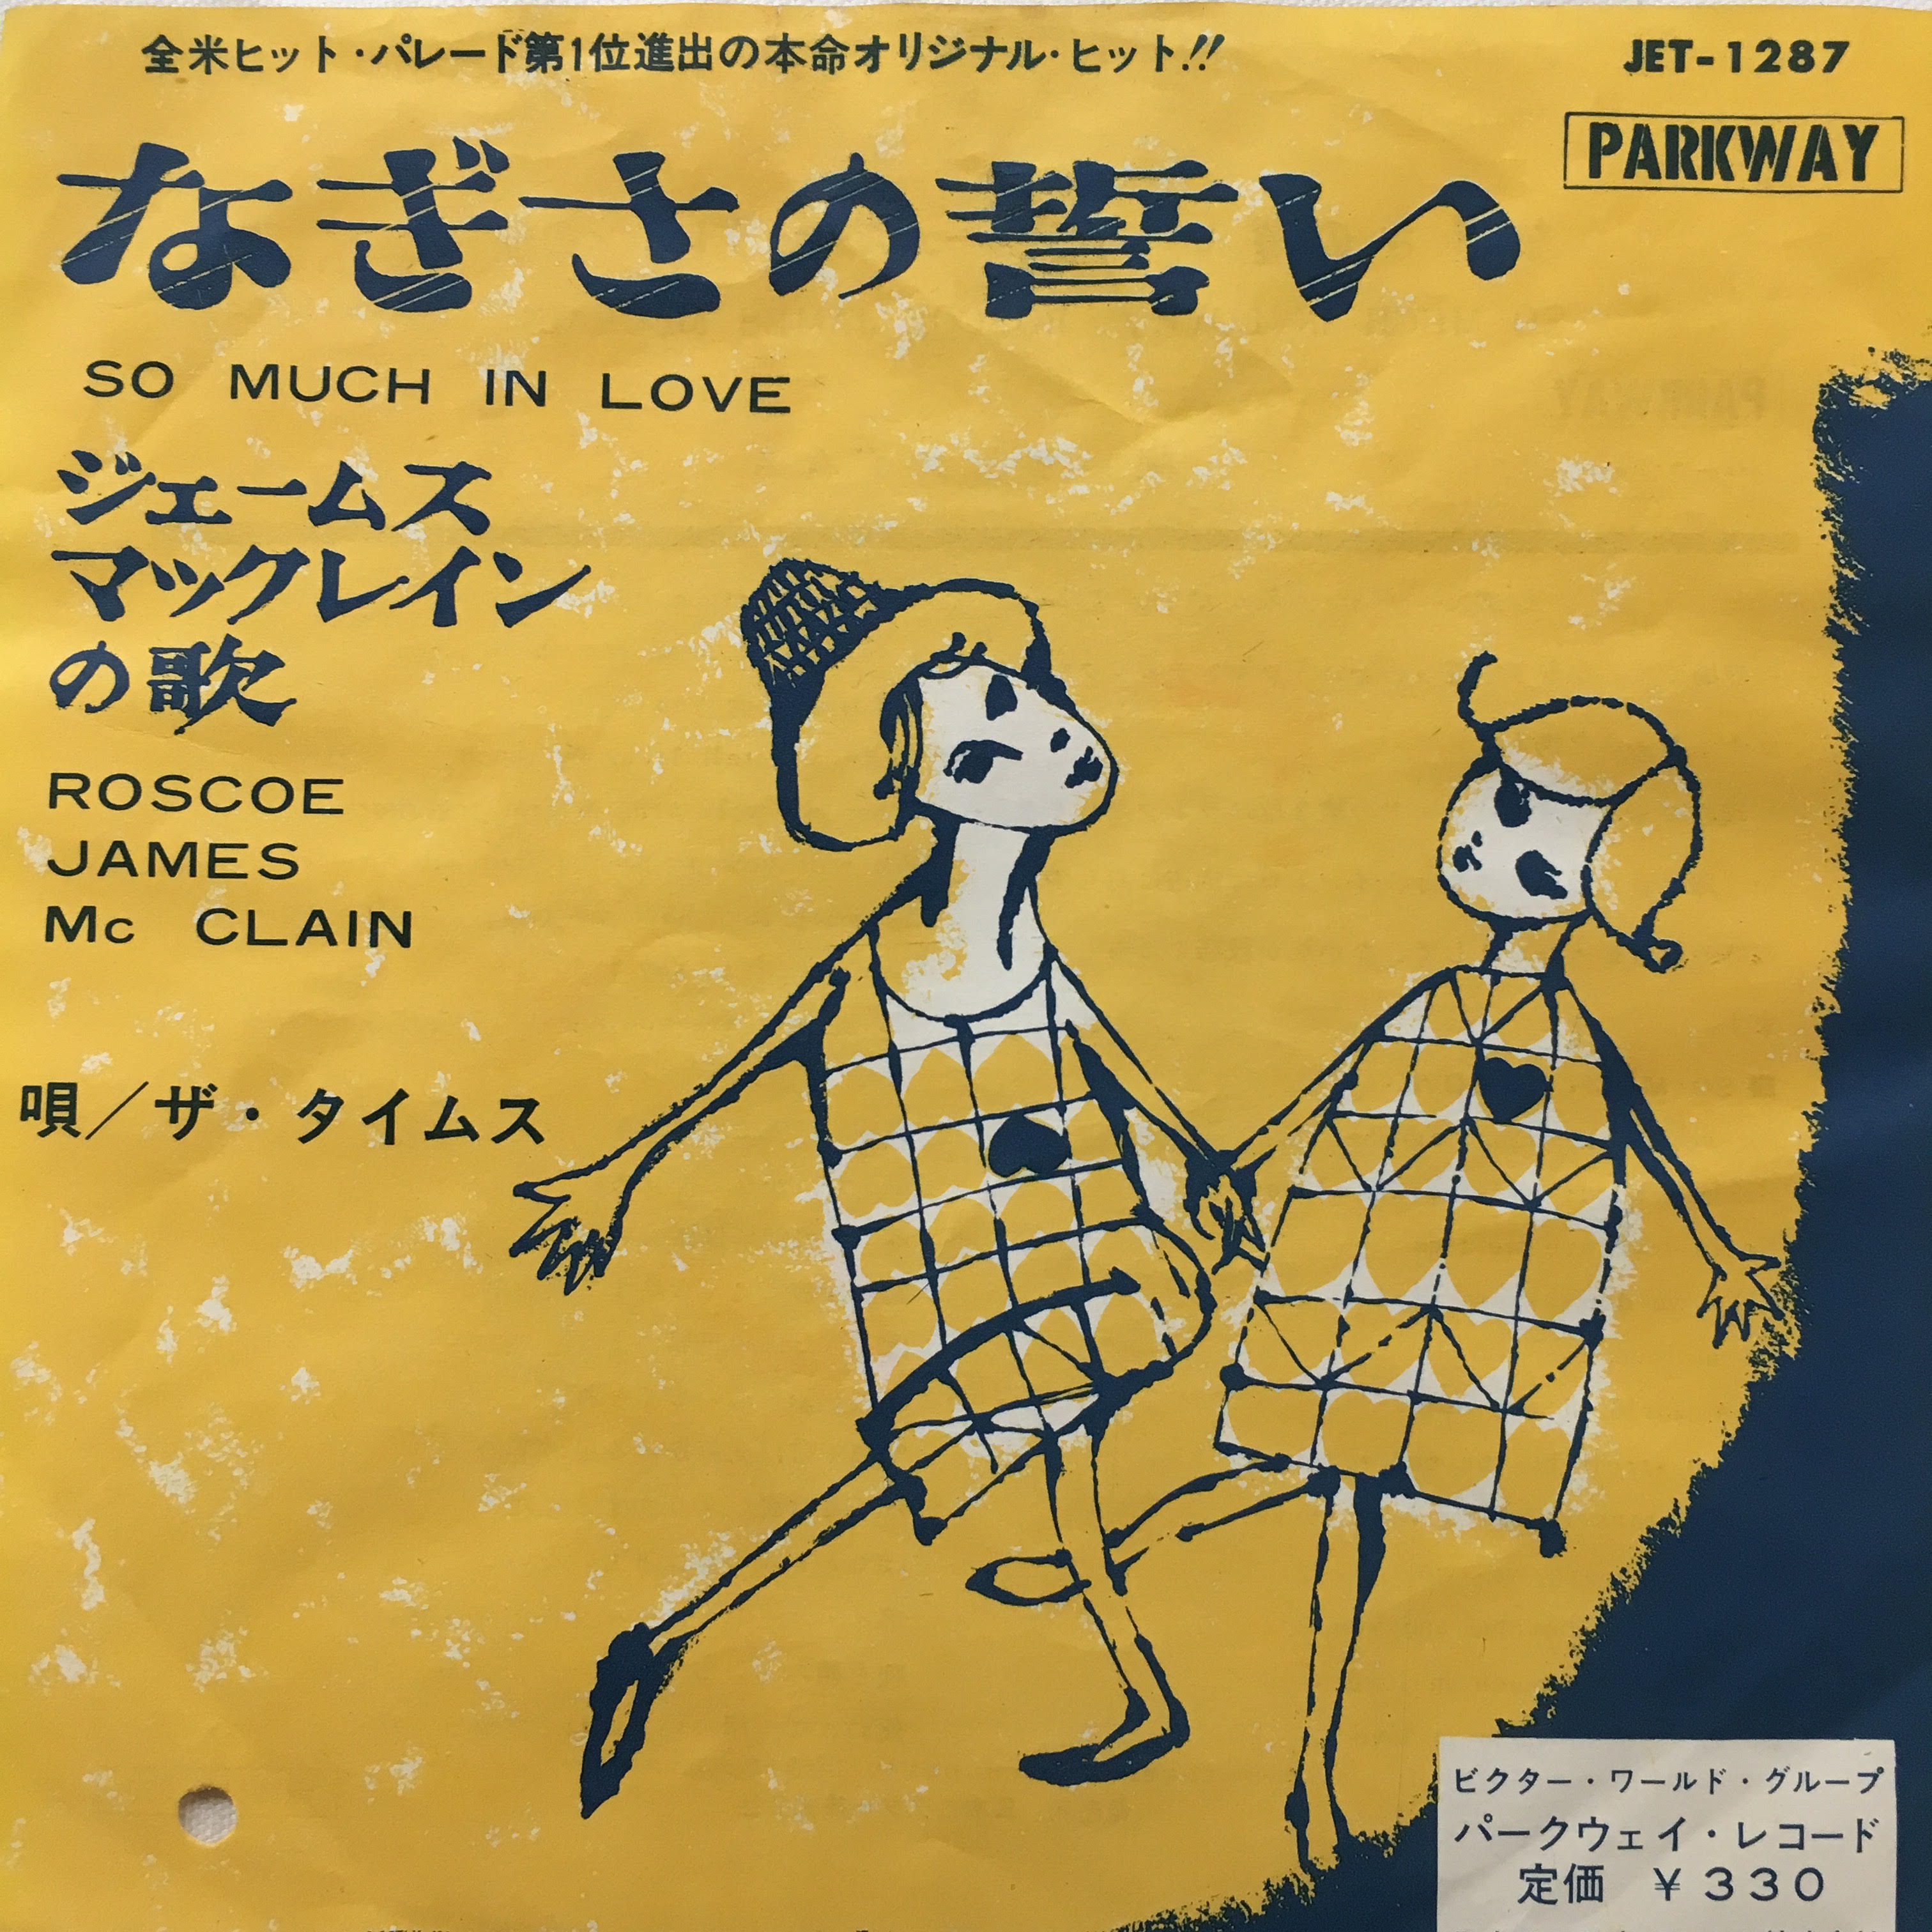 GW SPECIAL SALE情報②】5/3(WED)お宝大量放出!!! OLDIES 7inch SALE 